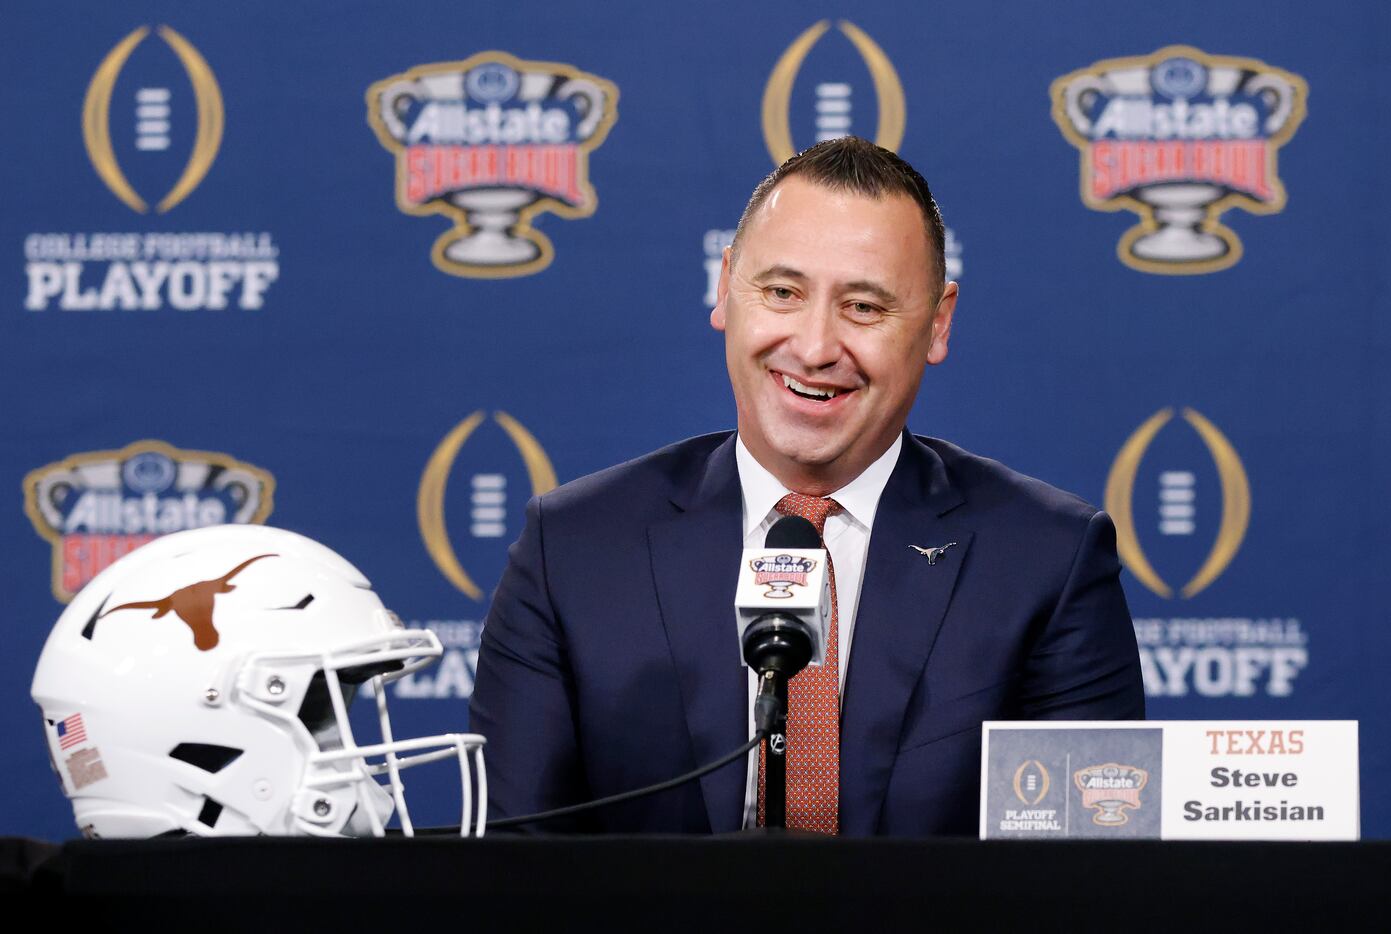 Texas, coach Steve Sarkisian agree to 4-year contract extension